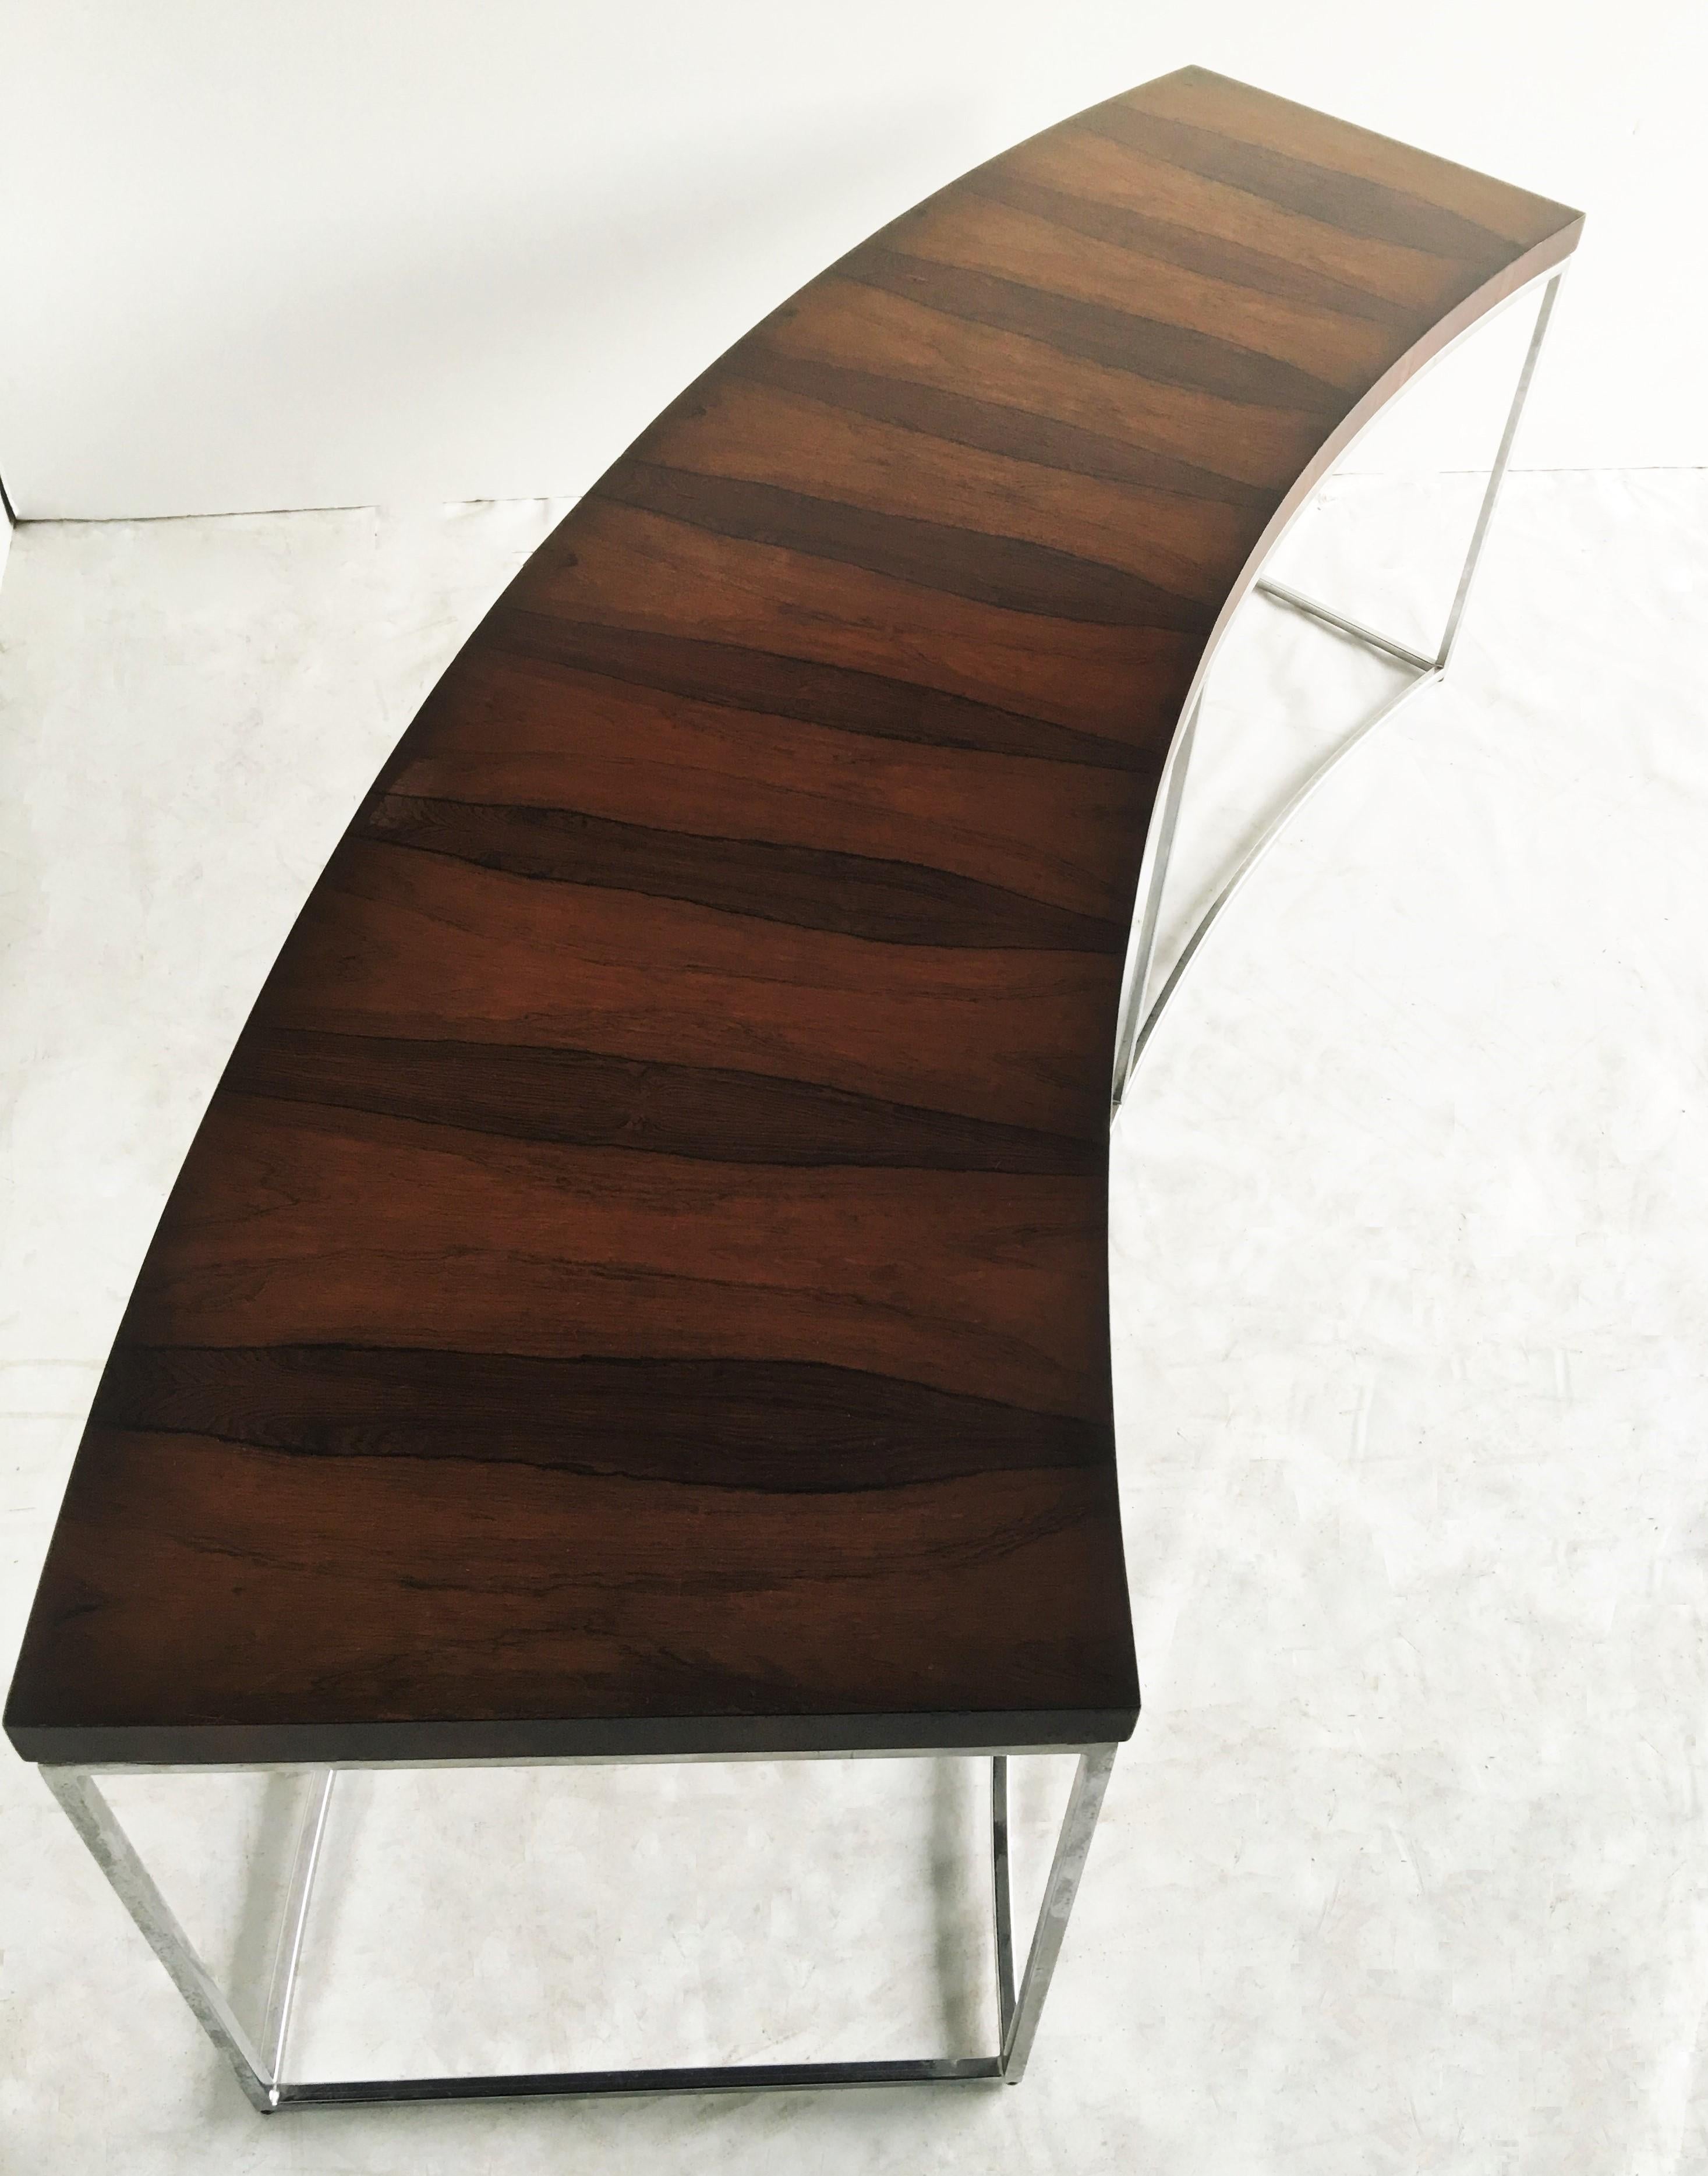 Two Rosewood and Chrome Curved Sofa Tables by Milo Baughman 2